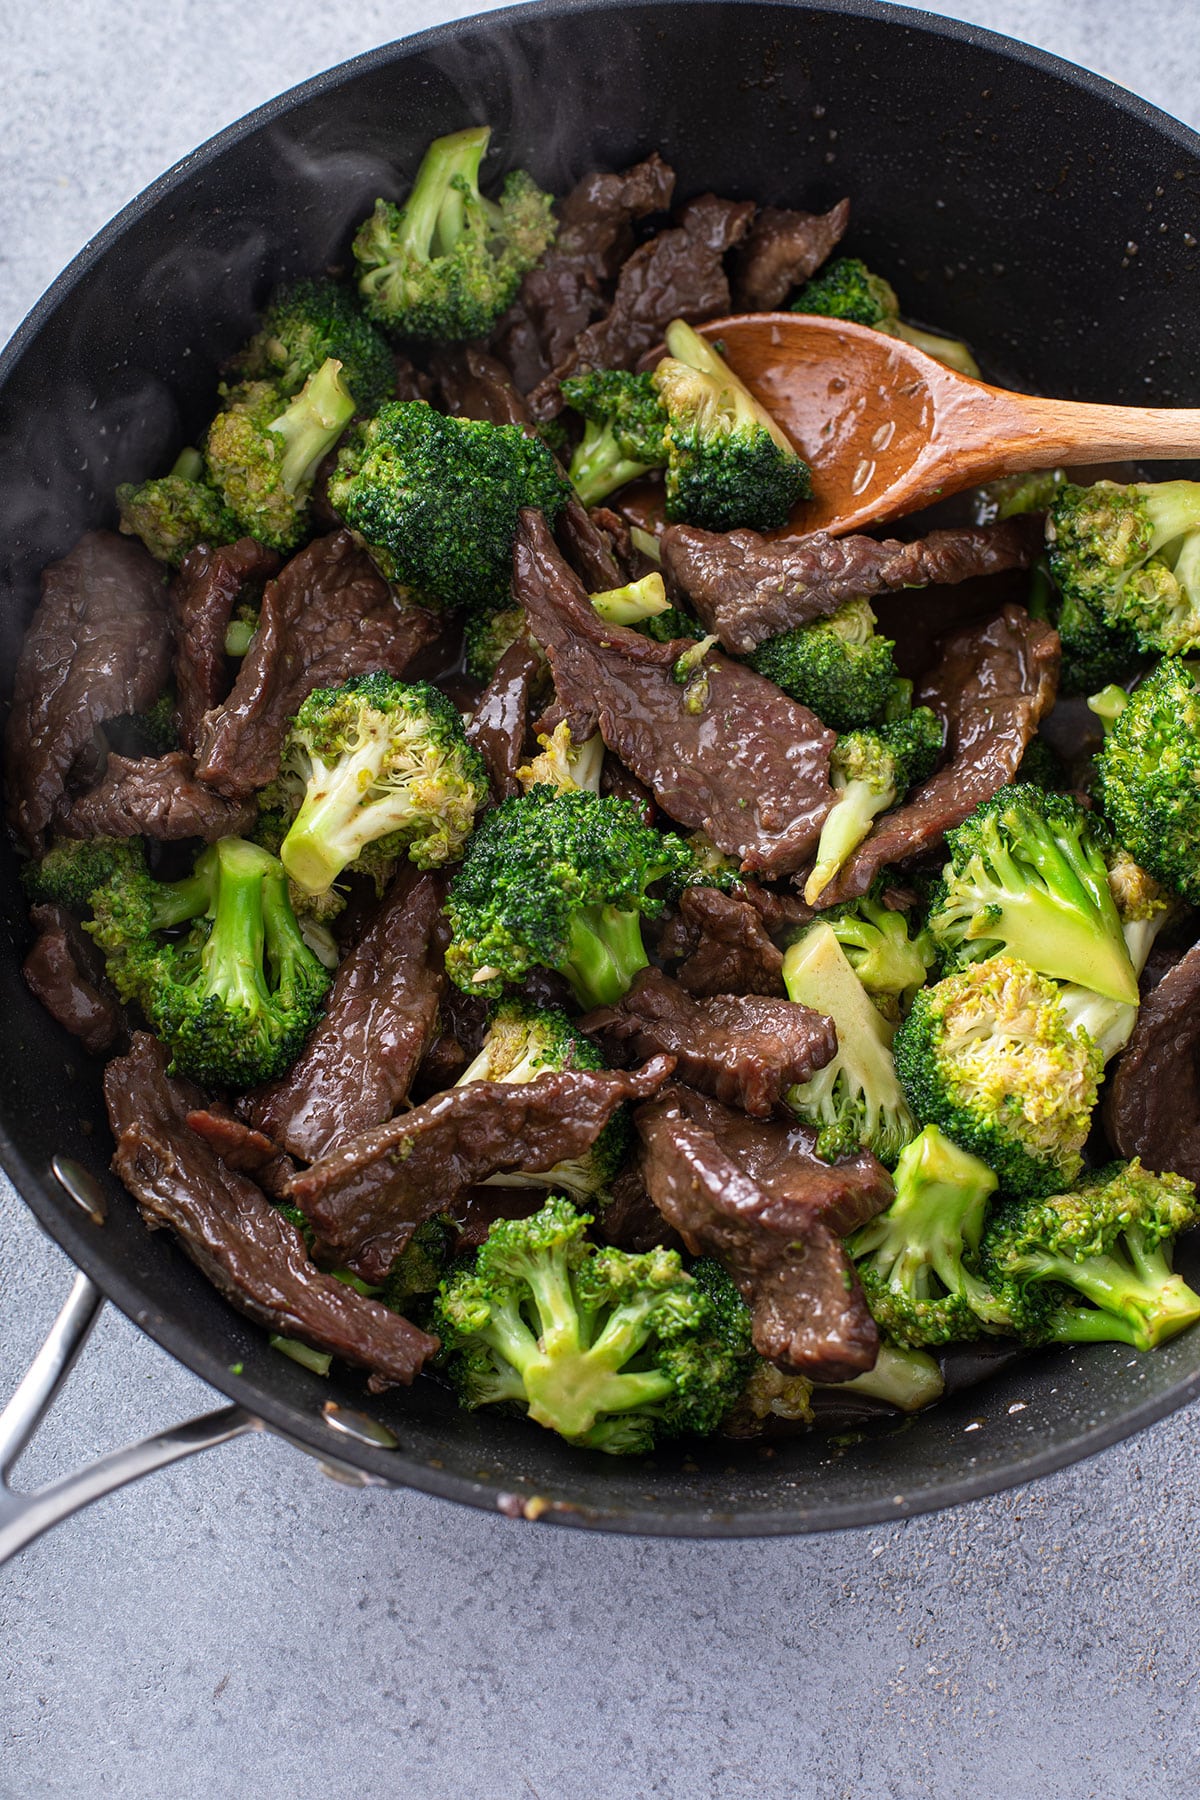 Close-up view of a skillet with beef and broccoli